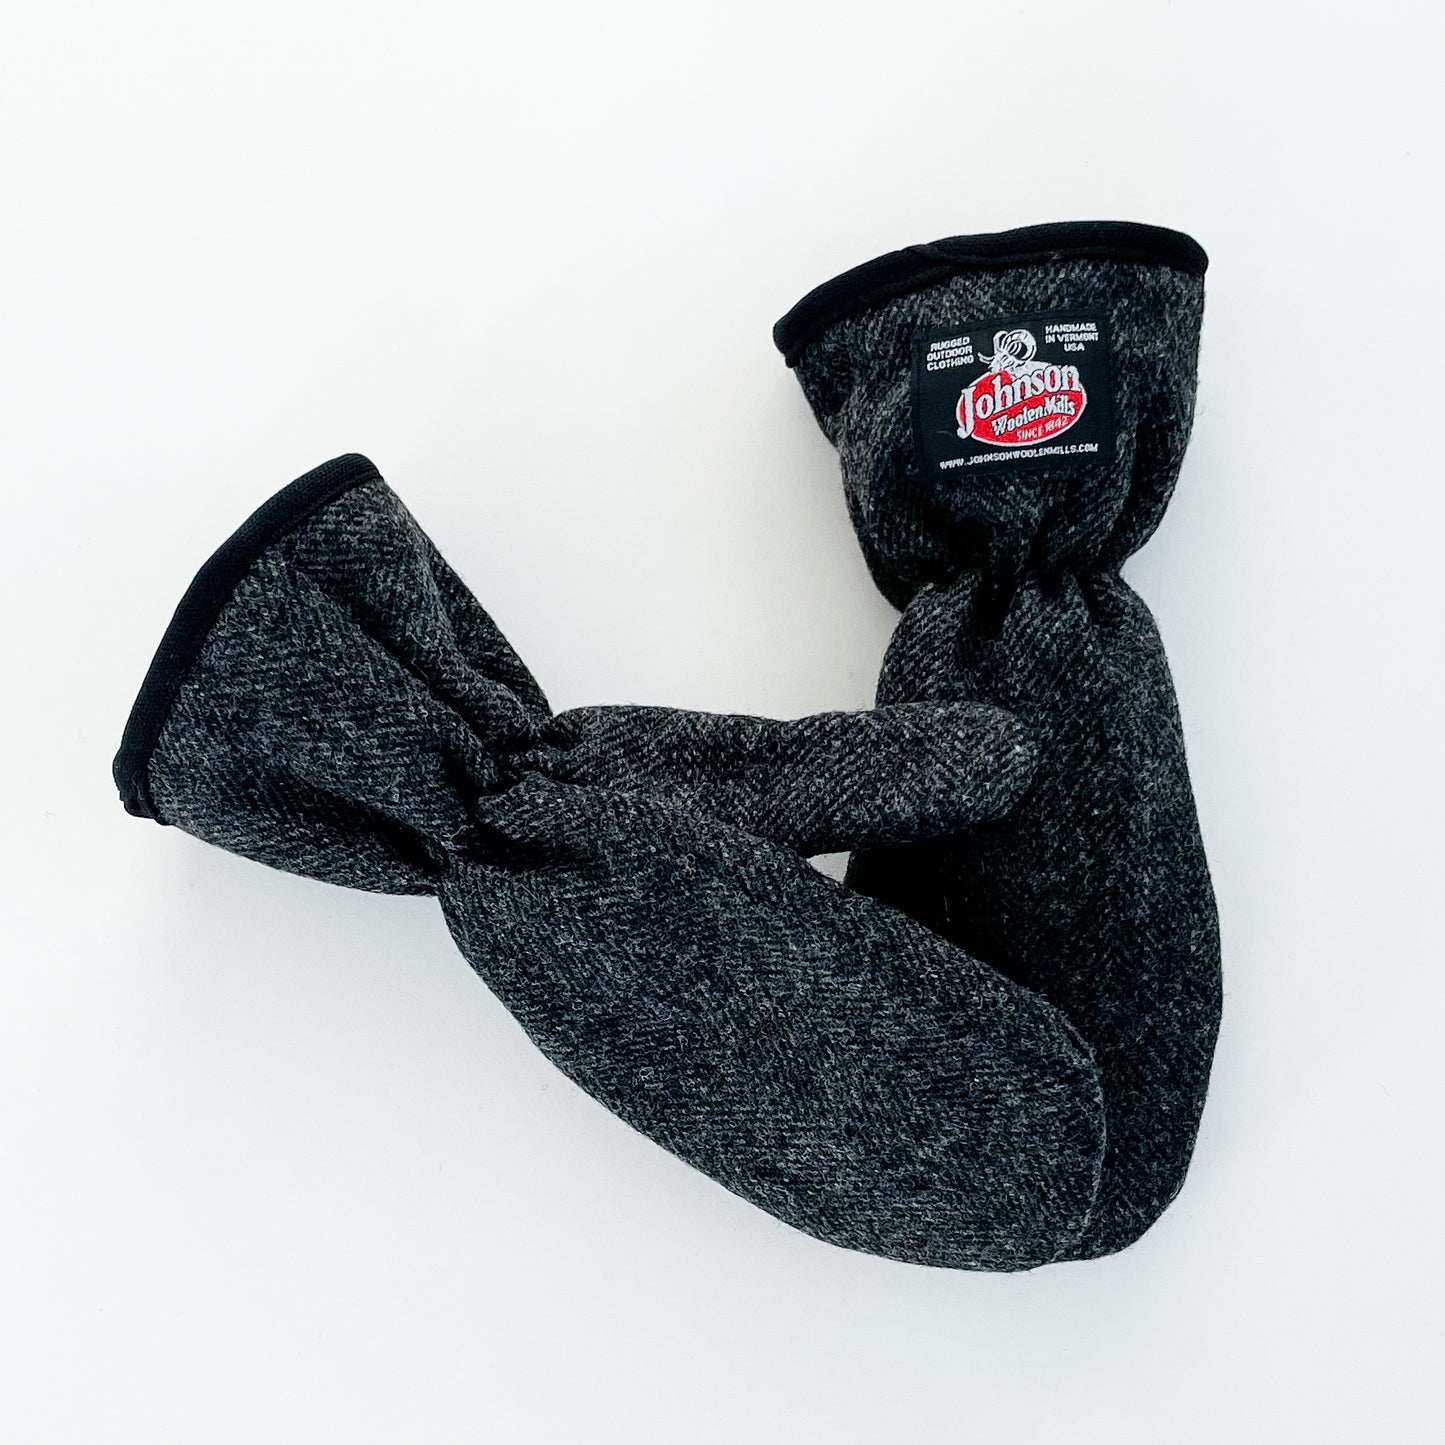 Johnson Woolen Mills mitten - gray herringbone with black piping and logo patch (adult)